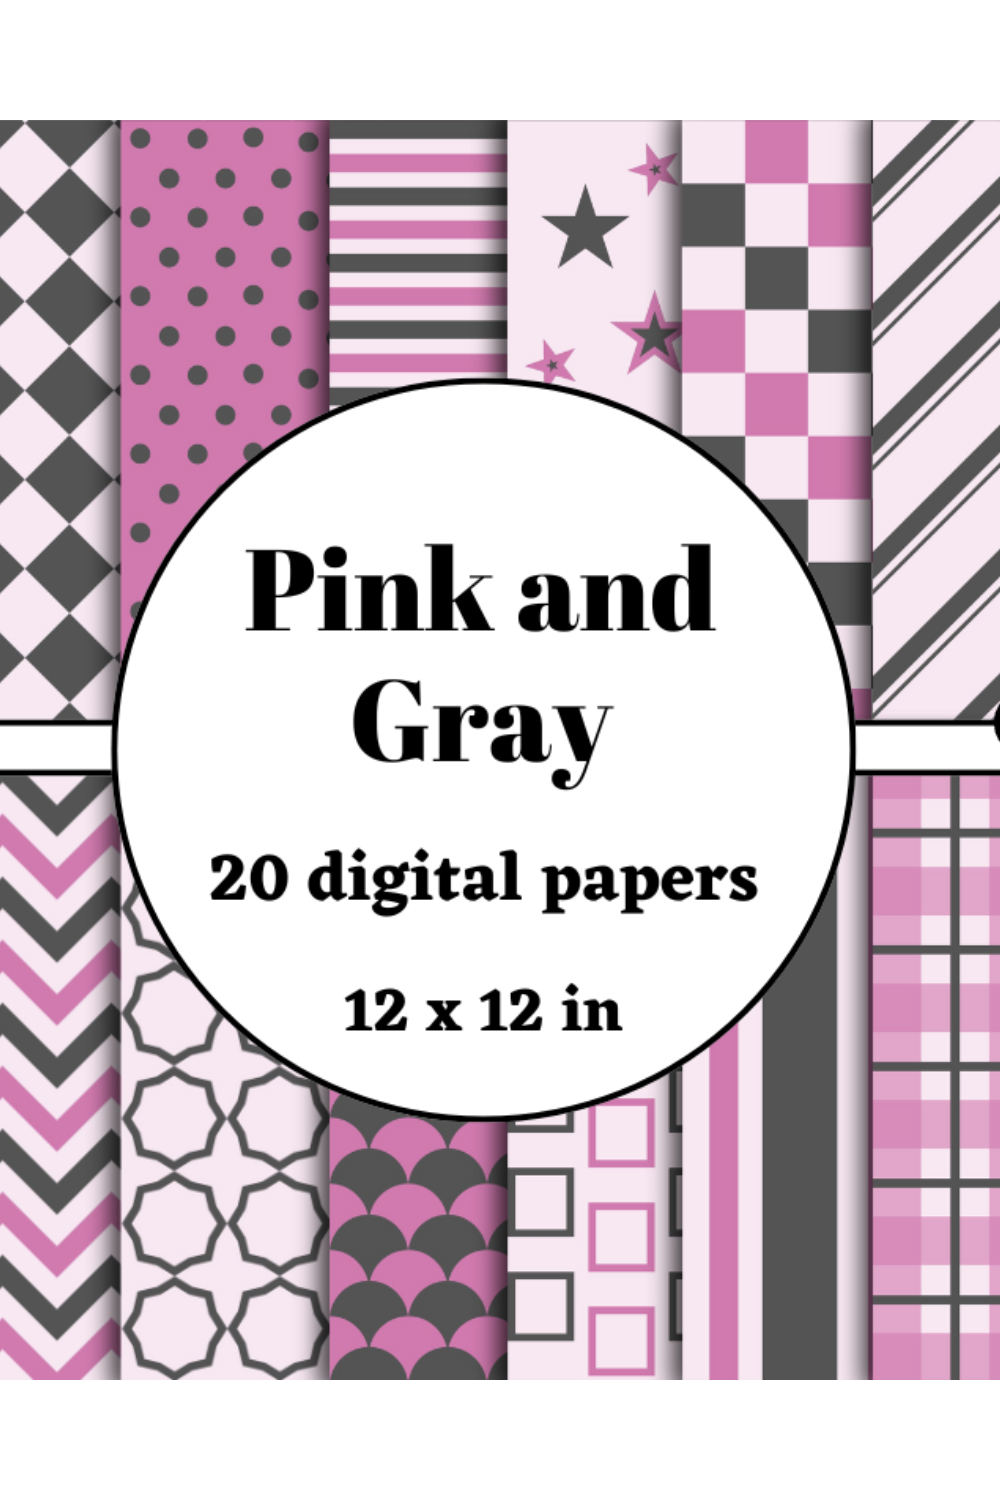 pink and gray digital papers pinterest preview image.